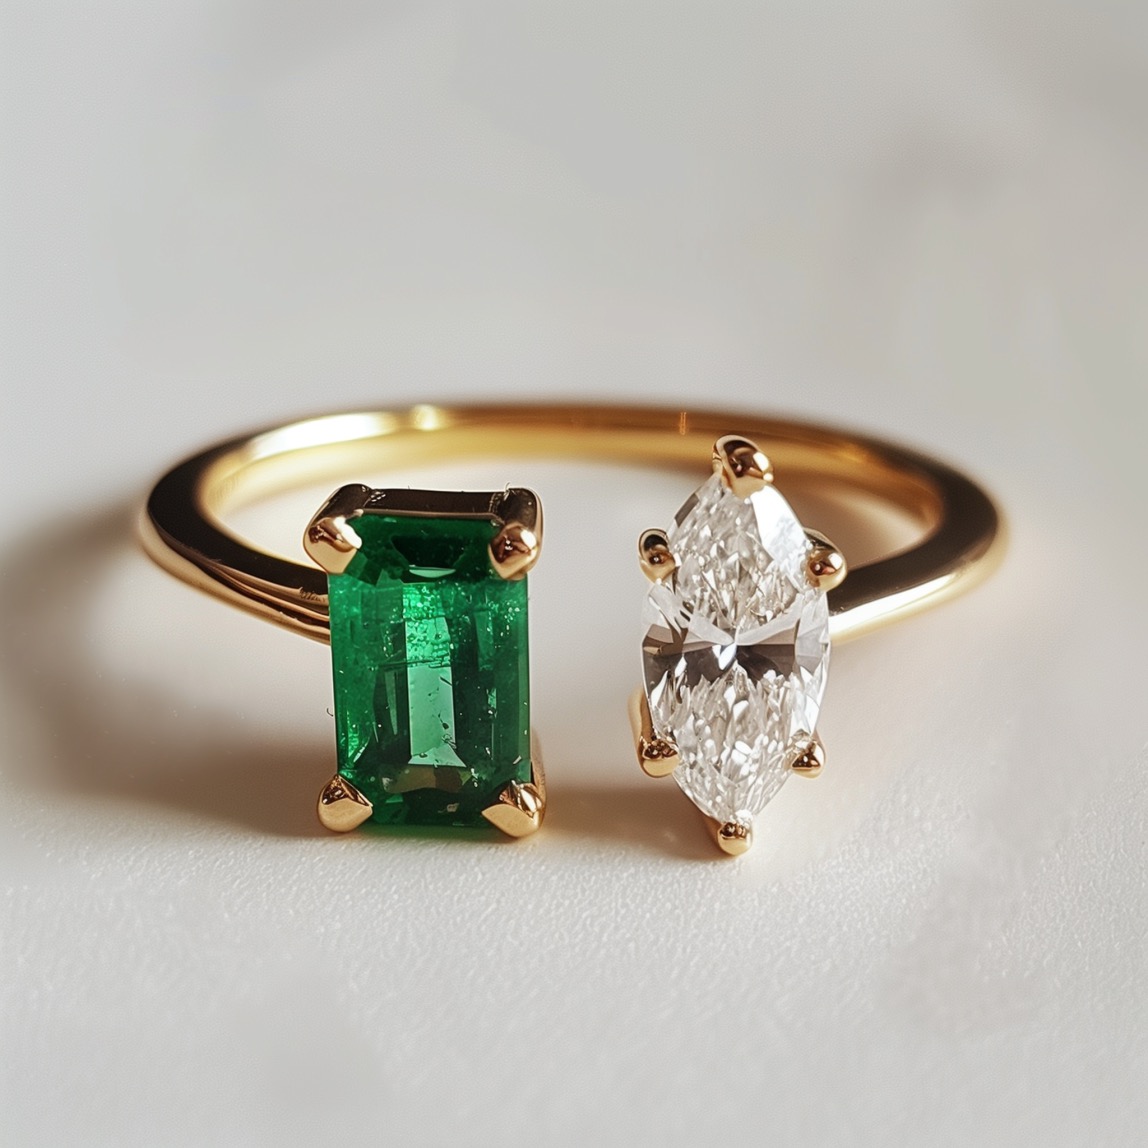 Taurus birthstone emerald cut emerald and marquise white diamond open ring in yellow gold makes a special gift.